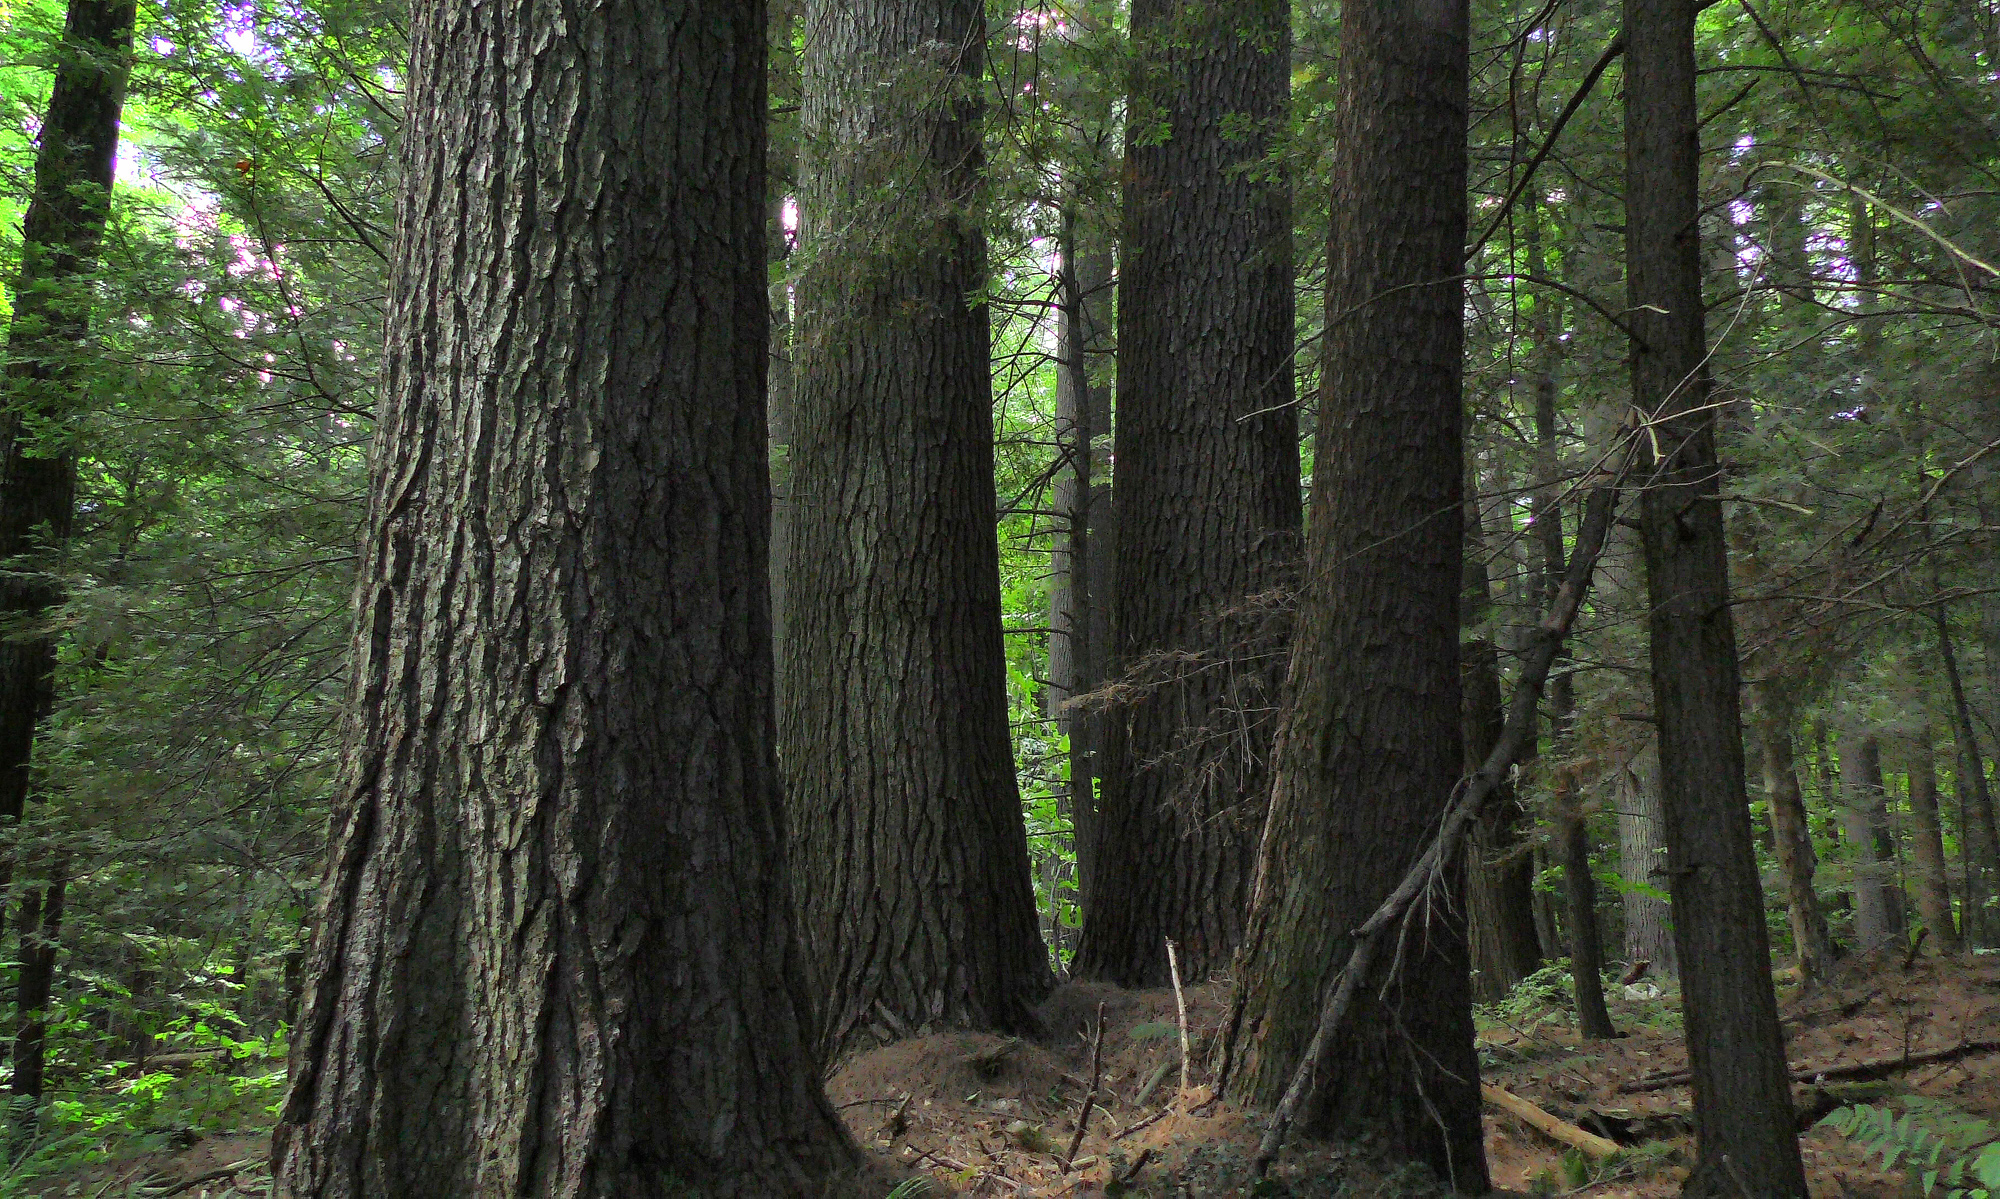 An old-growth hemlock stand. (photo © Ray Asselin / New England Forests)